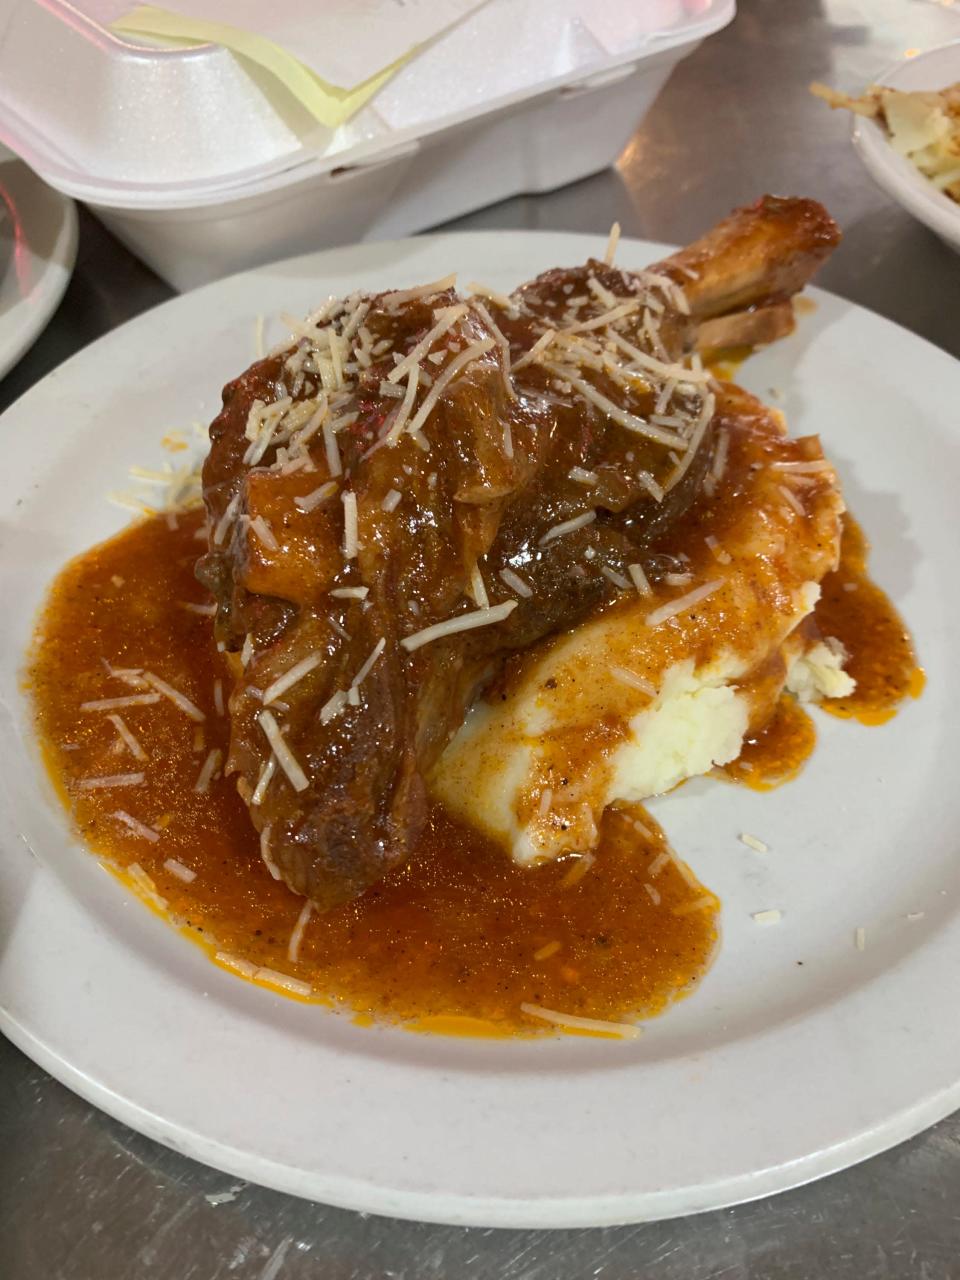 Lamb shank from Tommy's Diner